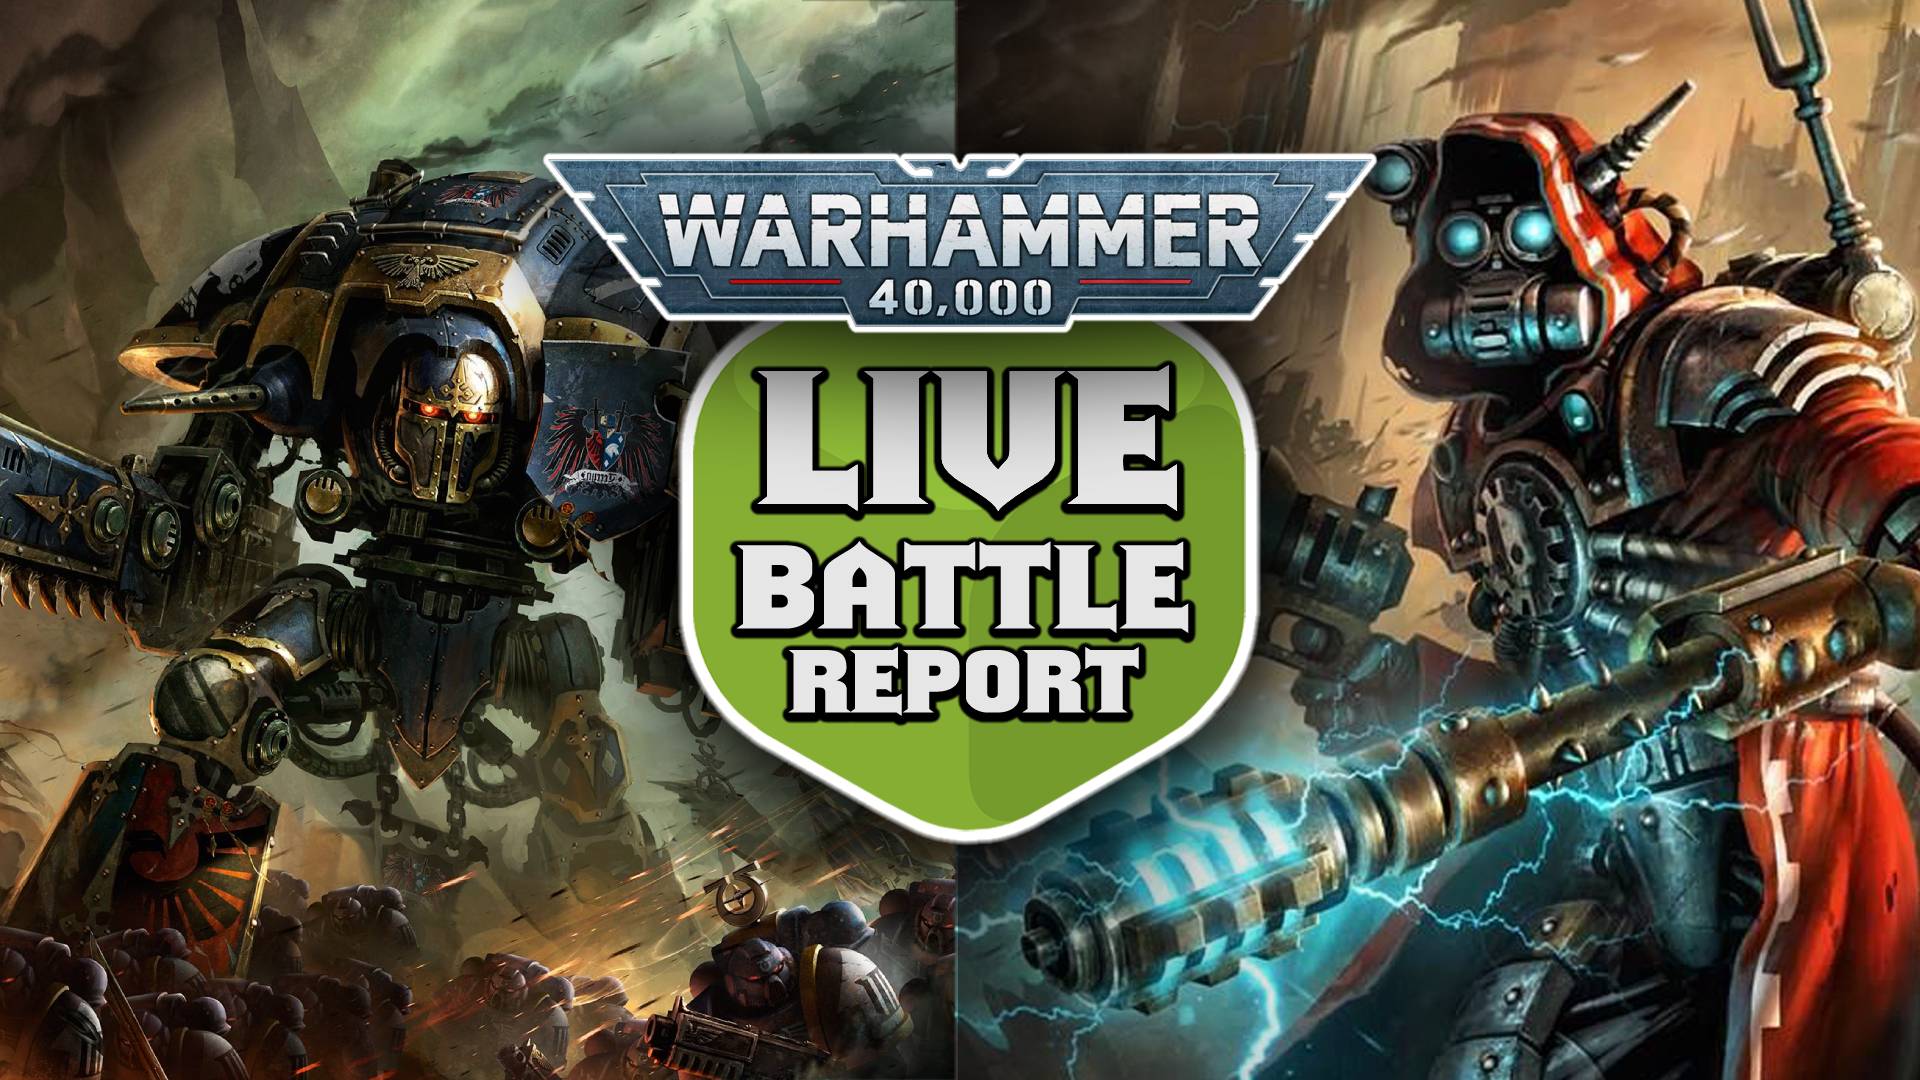 Lists for Imperial Knights vs Ad Mech Warhammer 40k Live Battle Report